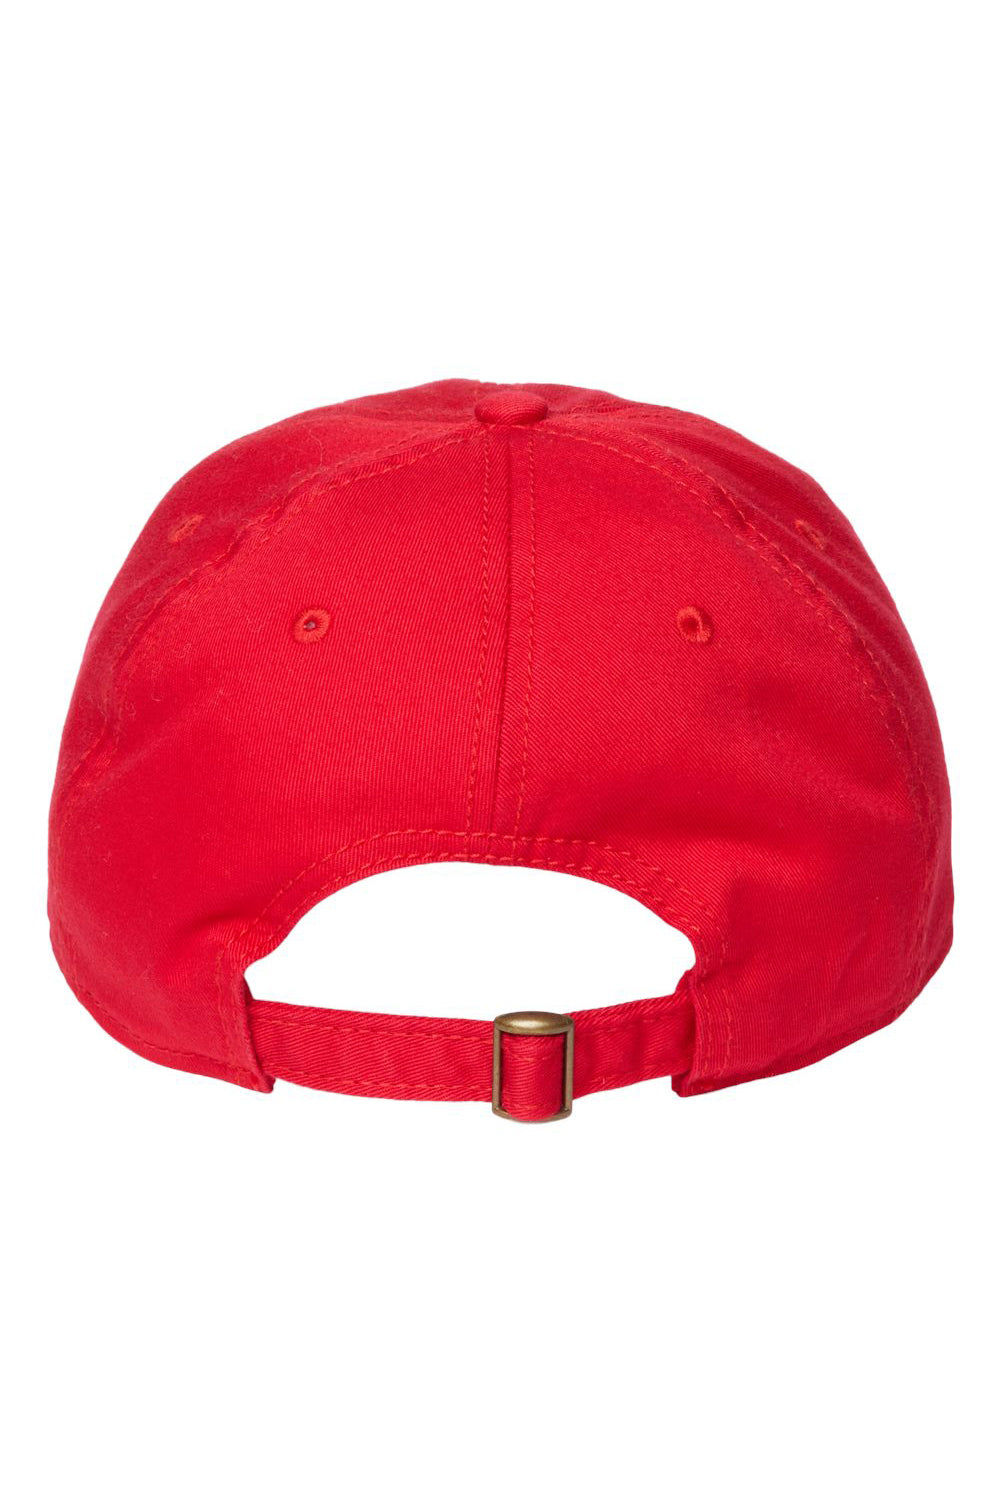 Cap America i1002 Mens Relaxed Adjustable Dad Hat Red Flat Back